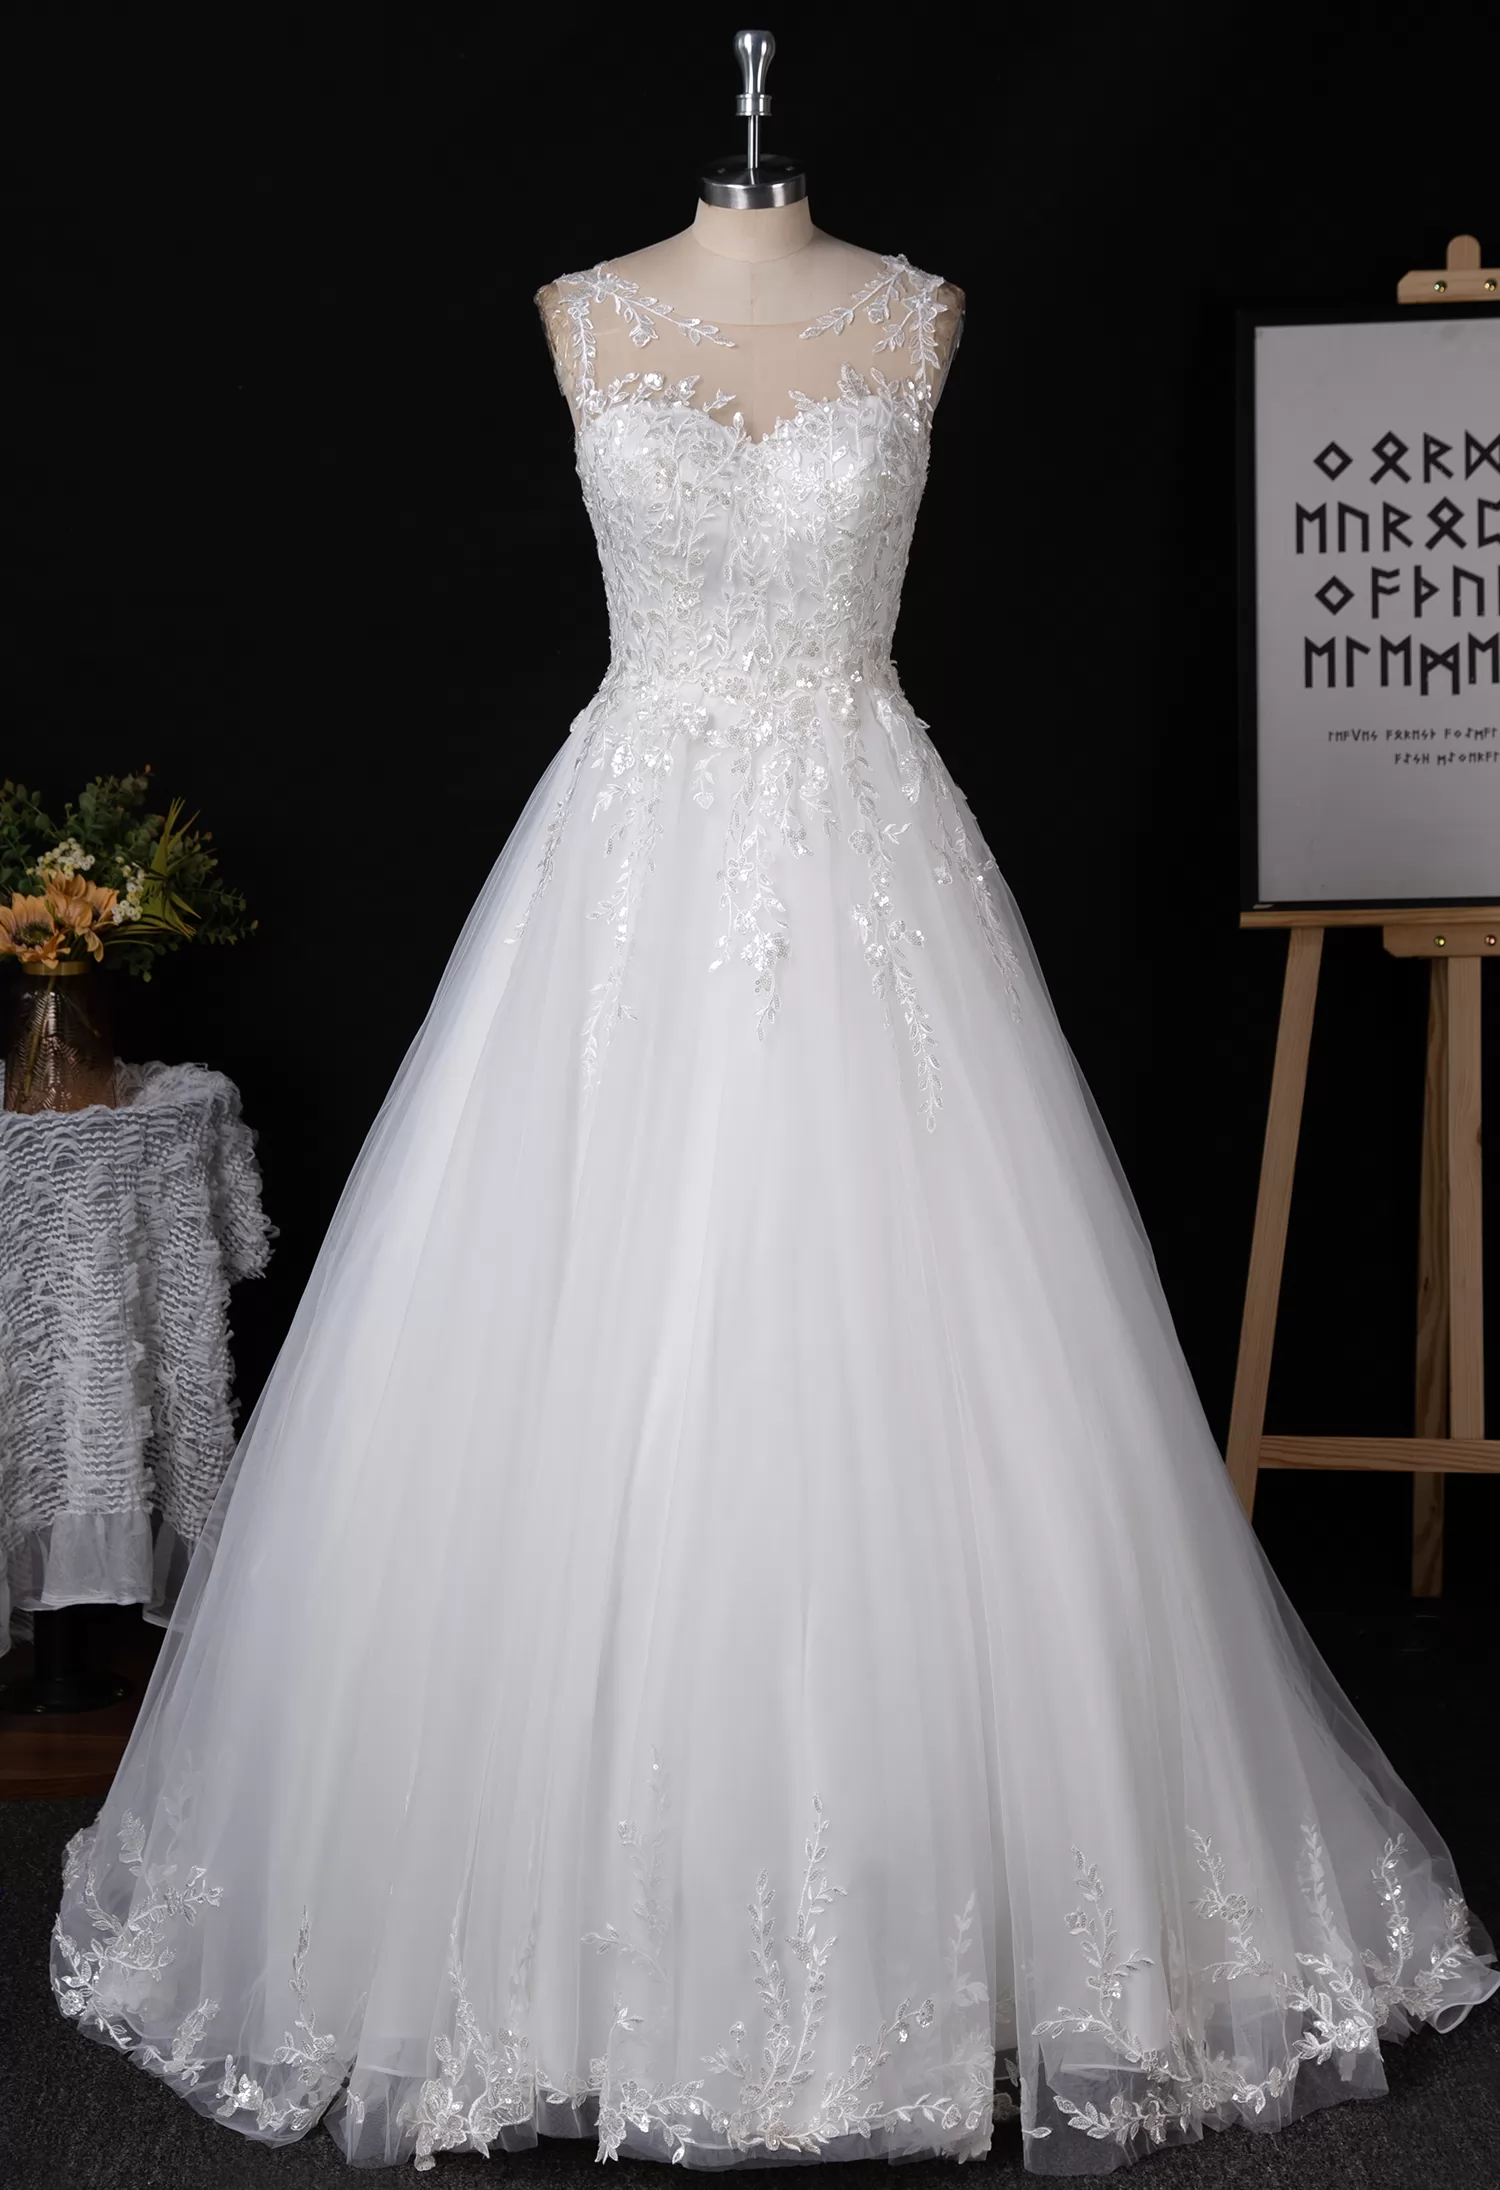 Shimmering Sequin Lace Bateau Wedding Gown